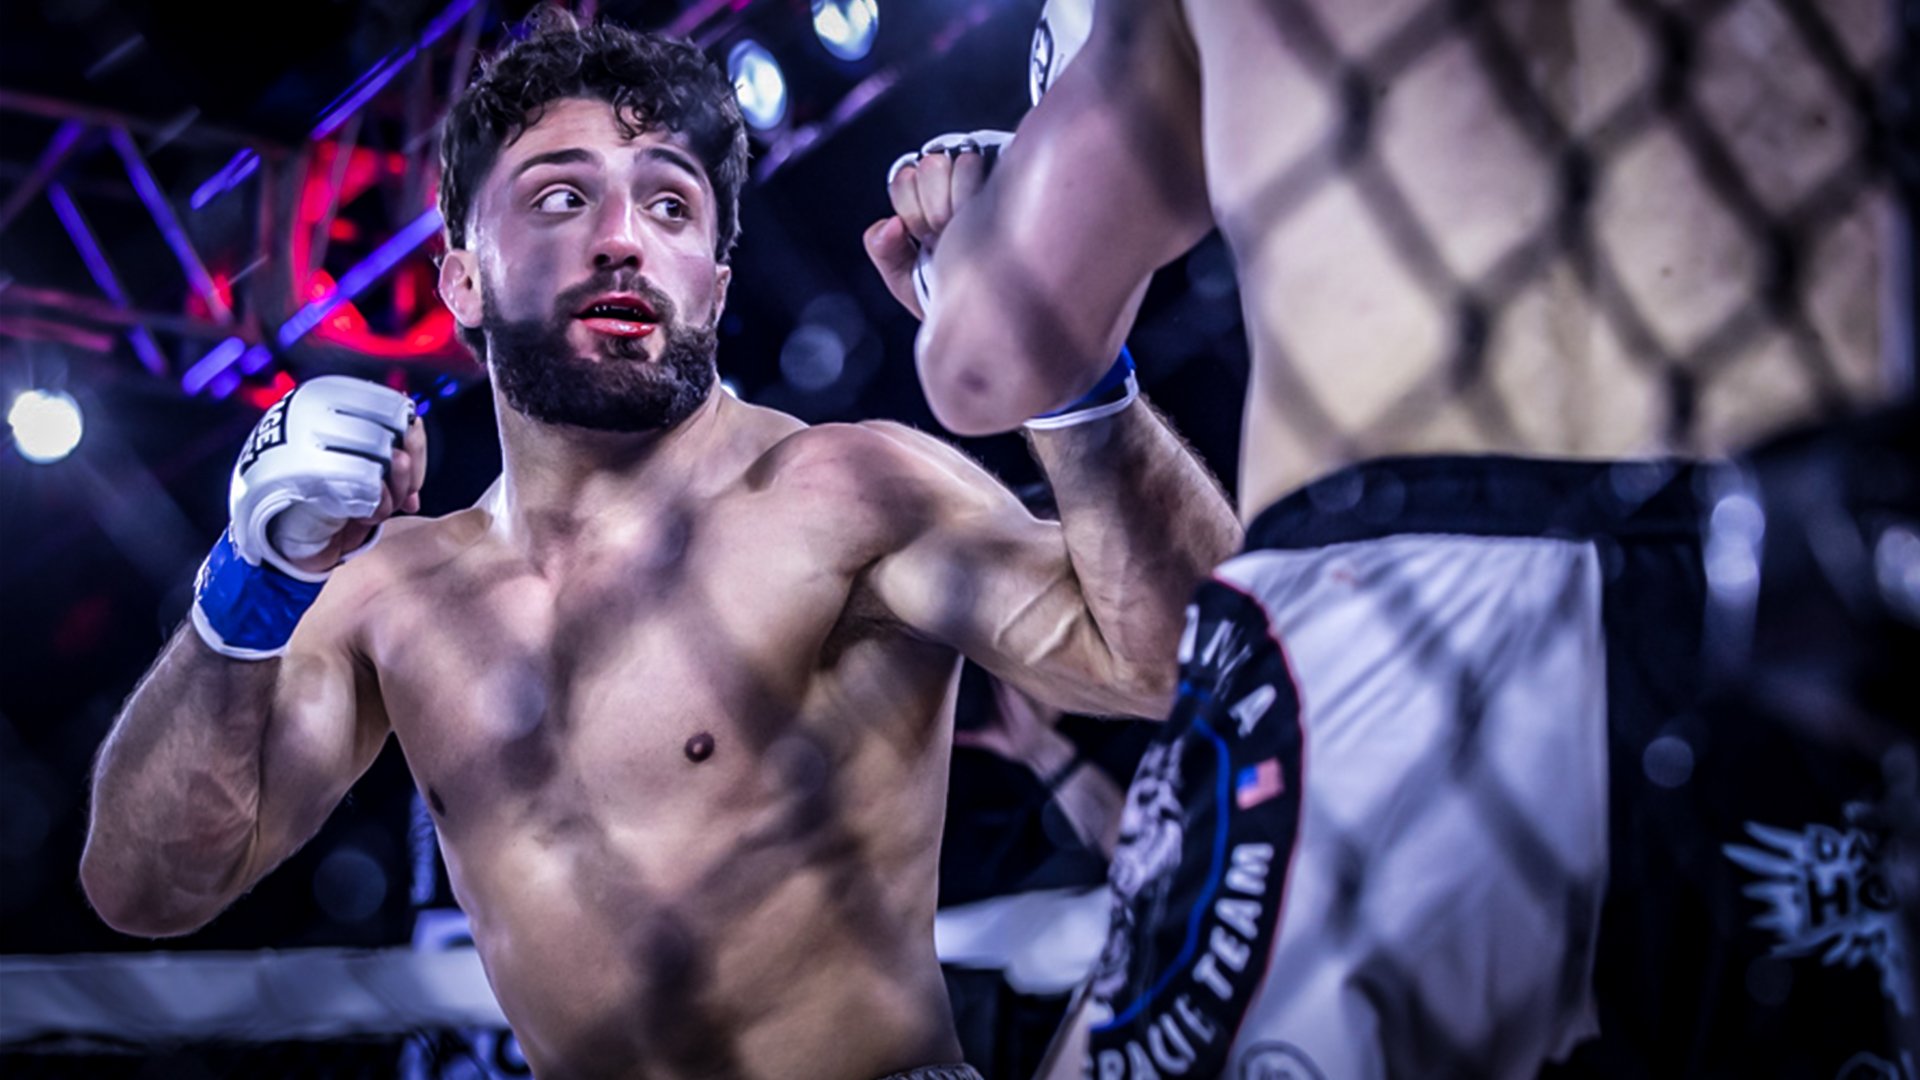 Anthony Dilemme continues striving for greatness at CFFC 124, aims to become UFC champion — Cage Fury Fighting Championships